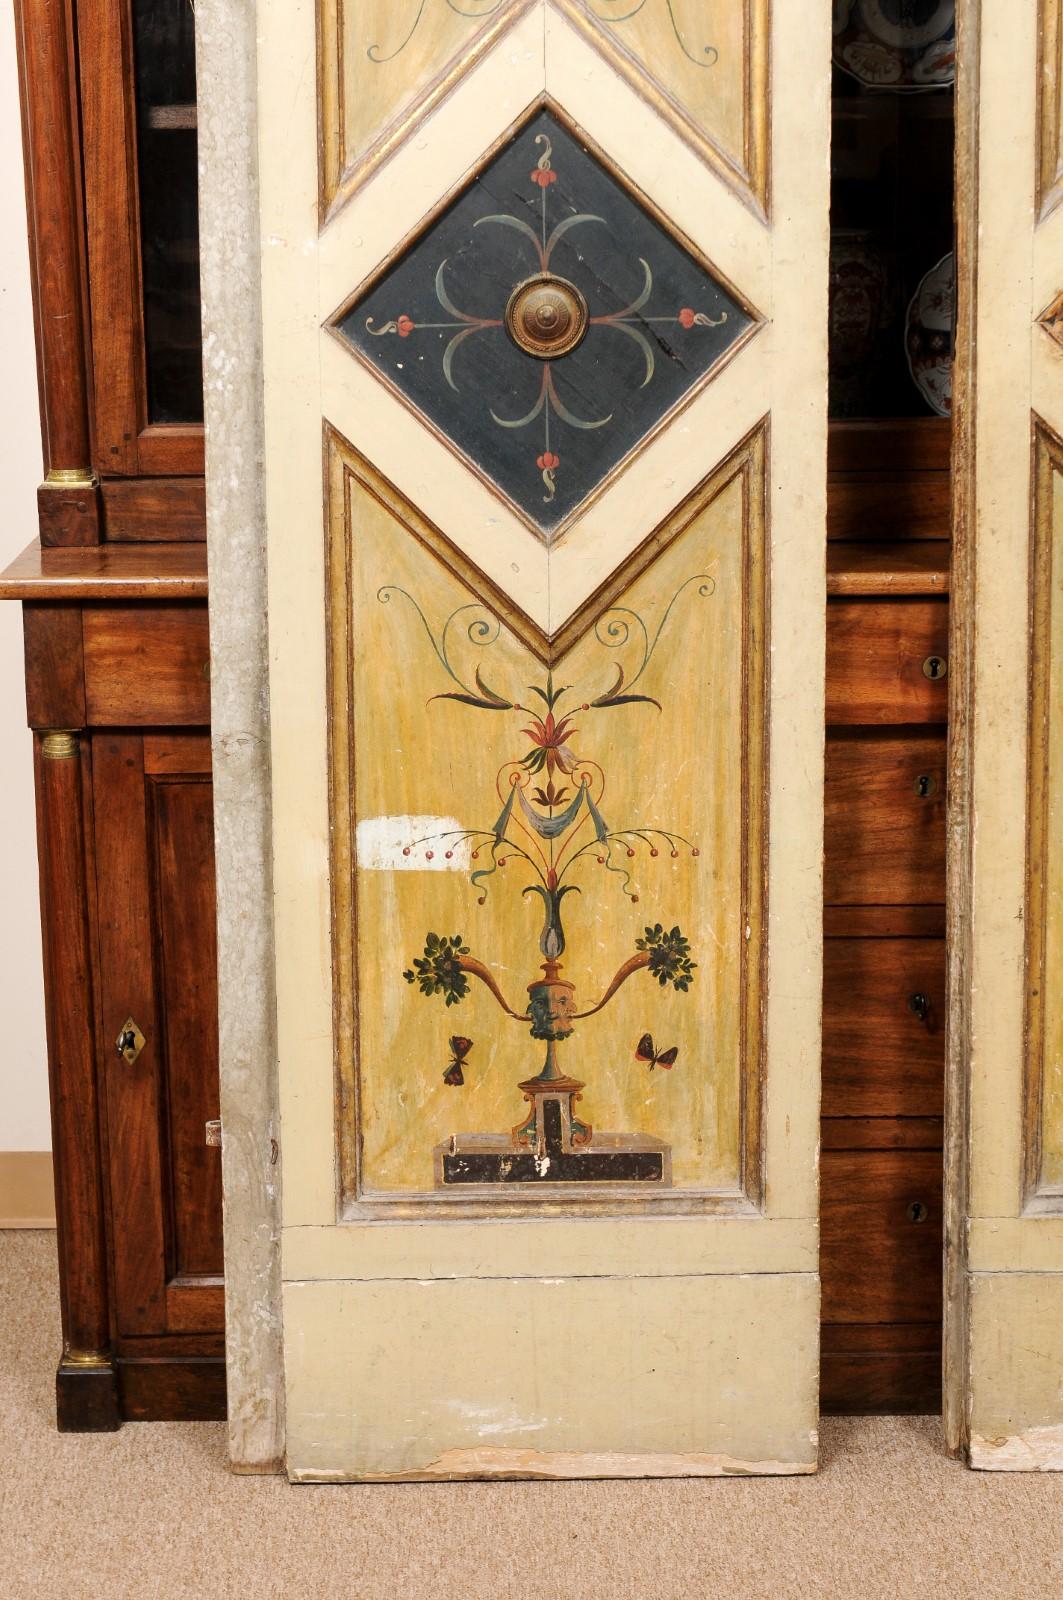 Pair of Neoclassical Painted Doors with Arabesque Designs, ca. 1800 For Sale 2